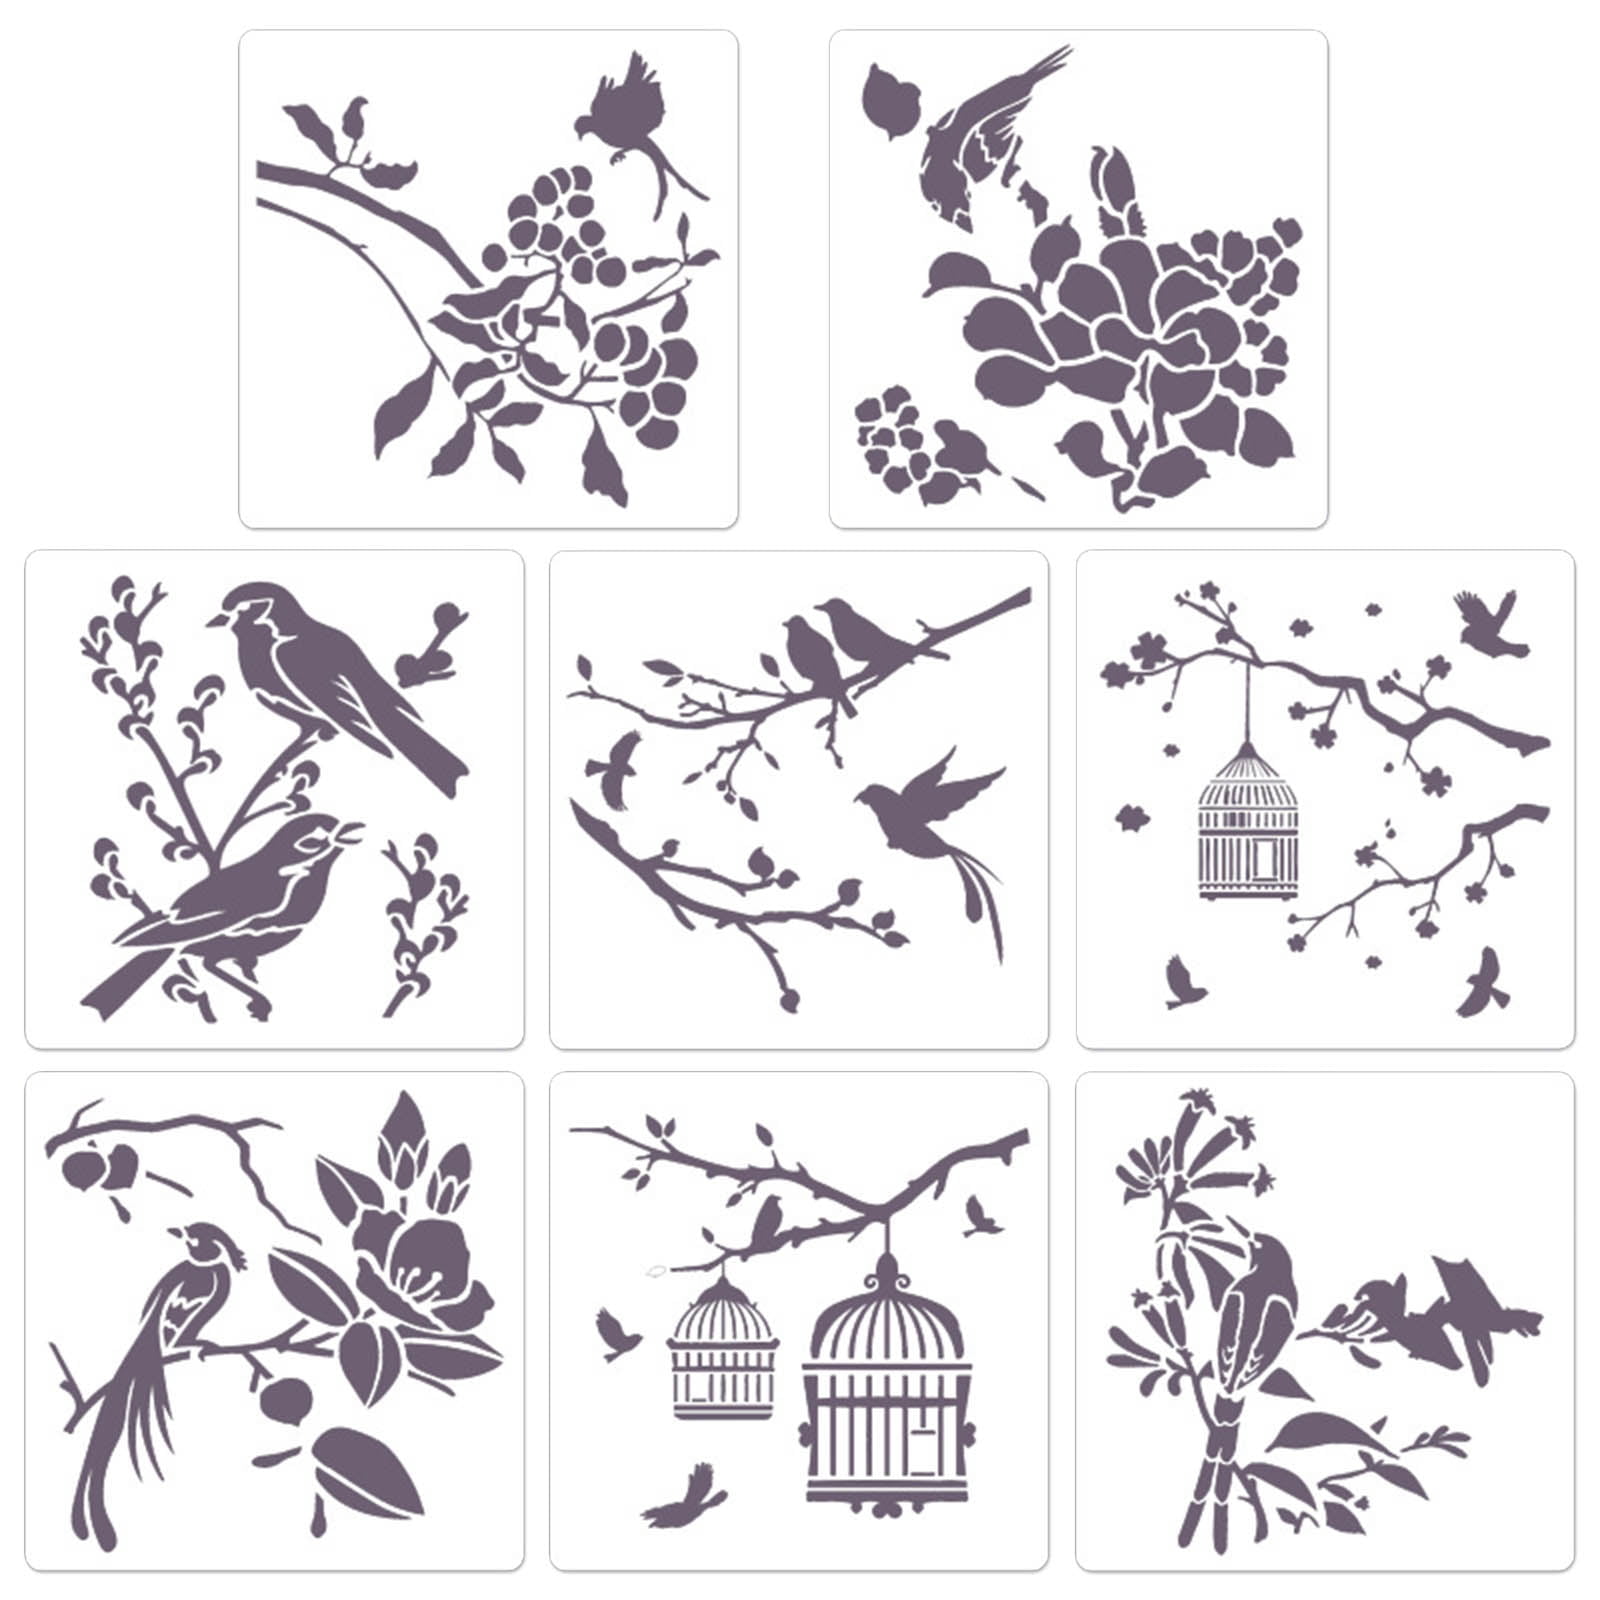 Ivy Stencil Classic Wall Border Leaf Stencils for Painting